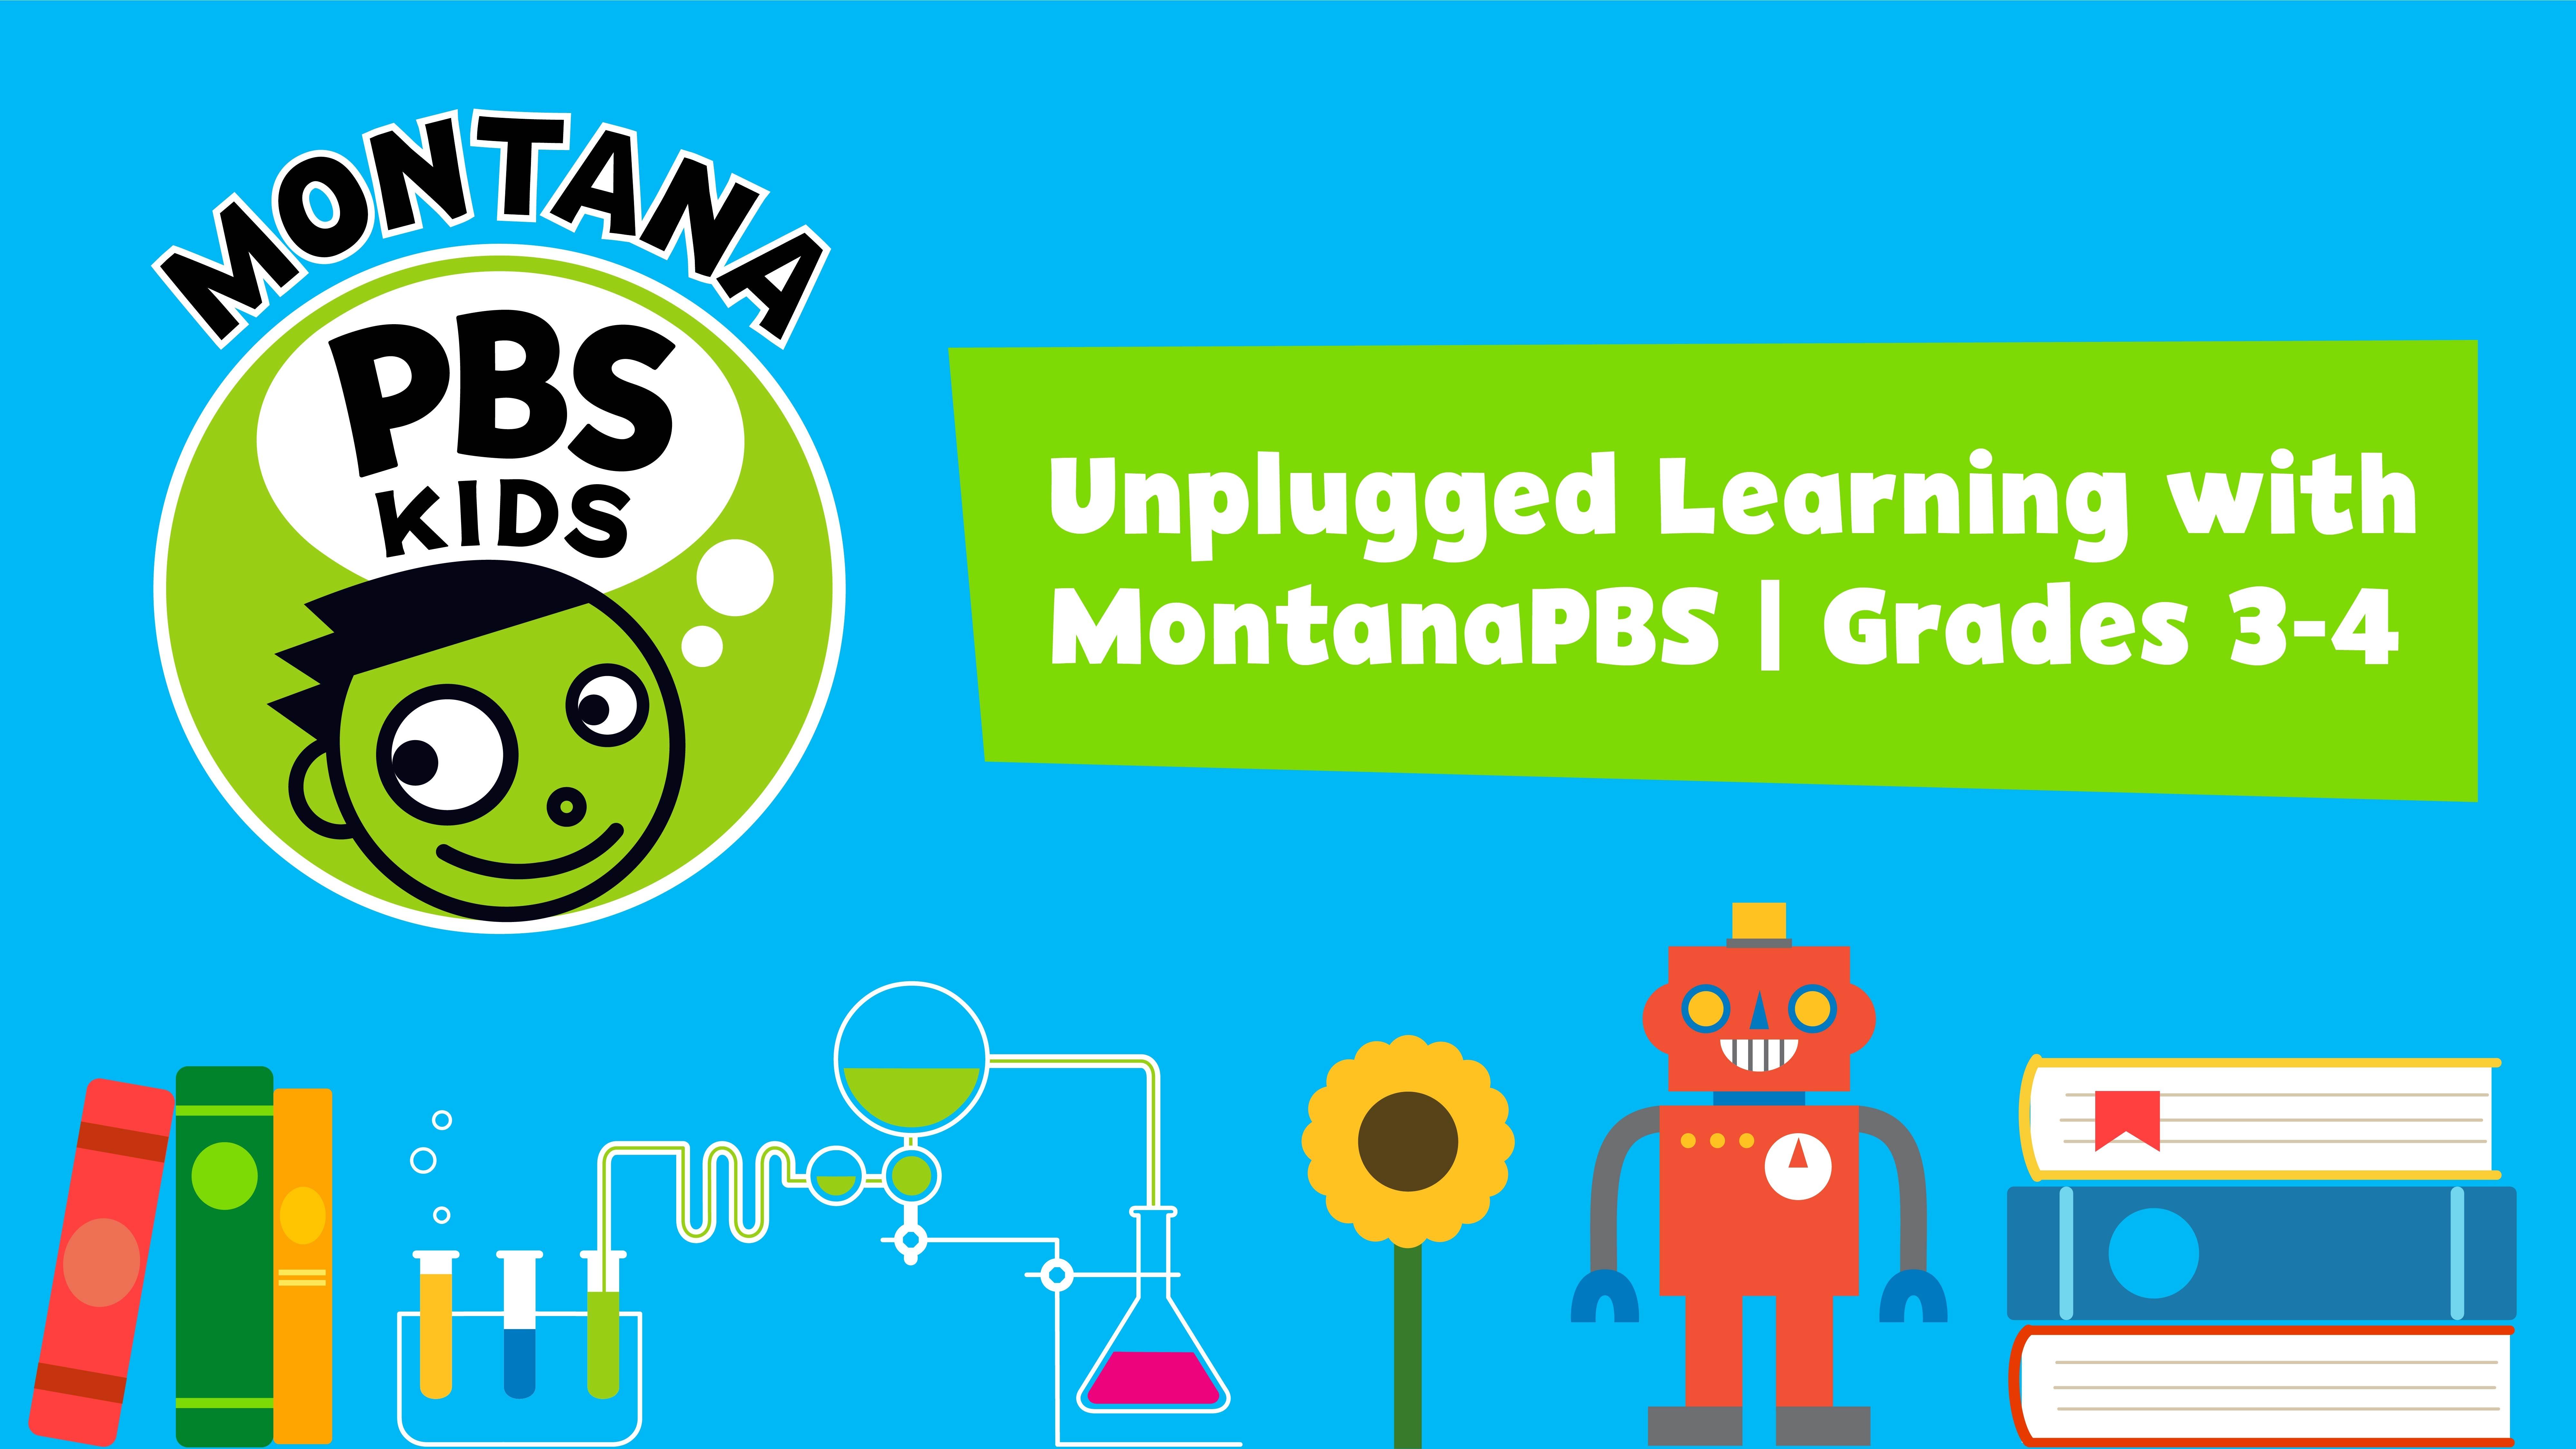 Unplugged Learning with MontanaPBS Grades 3-4